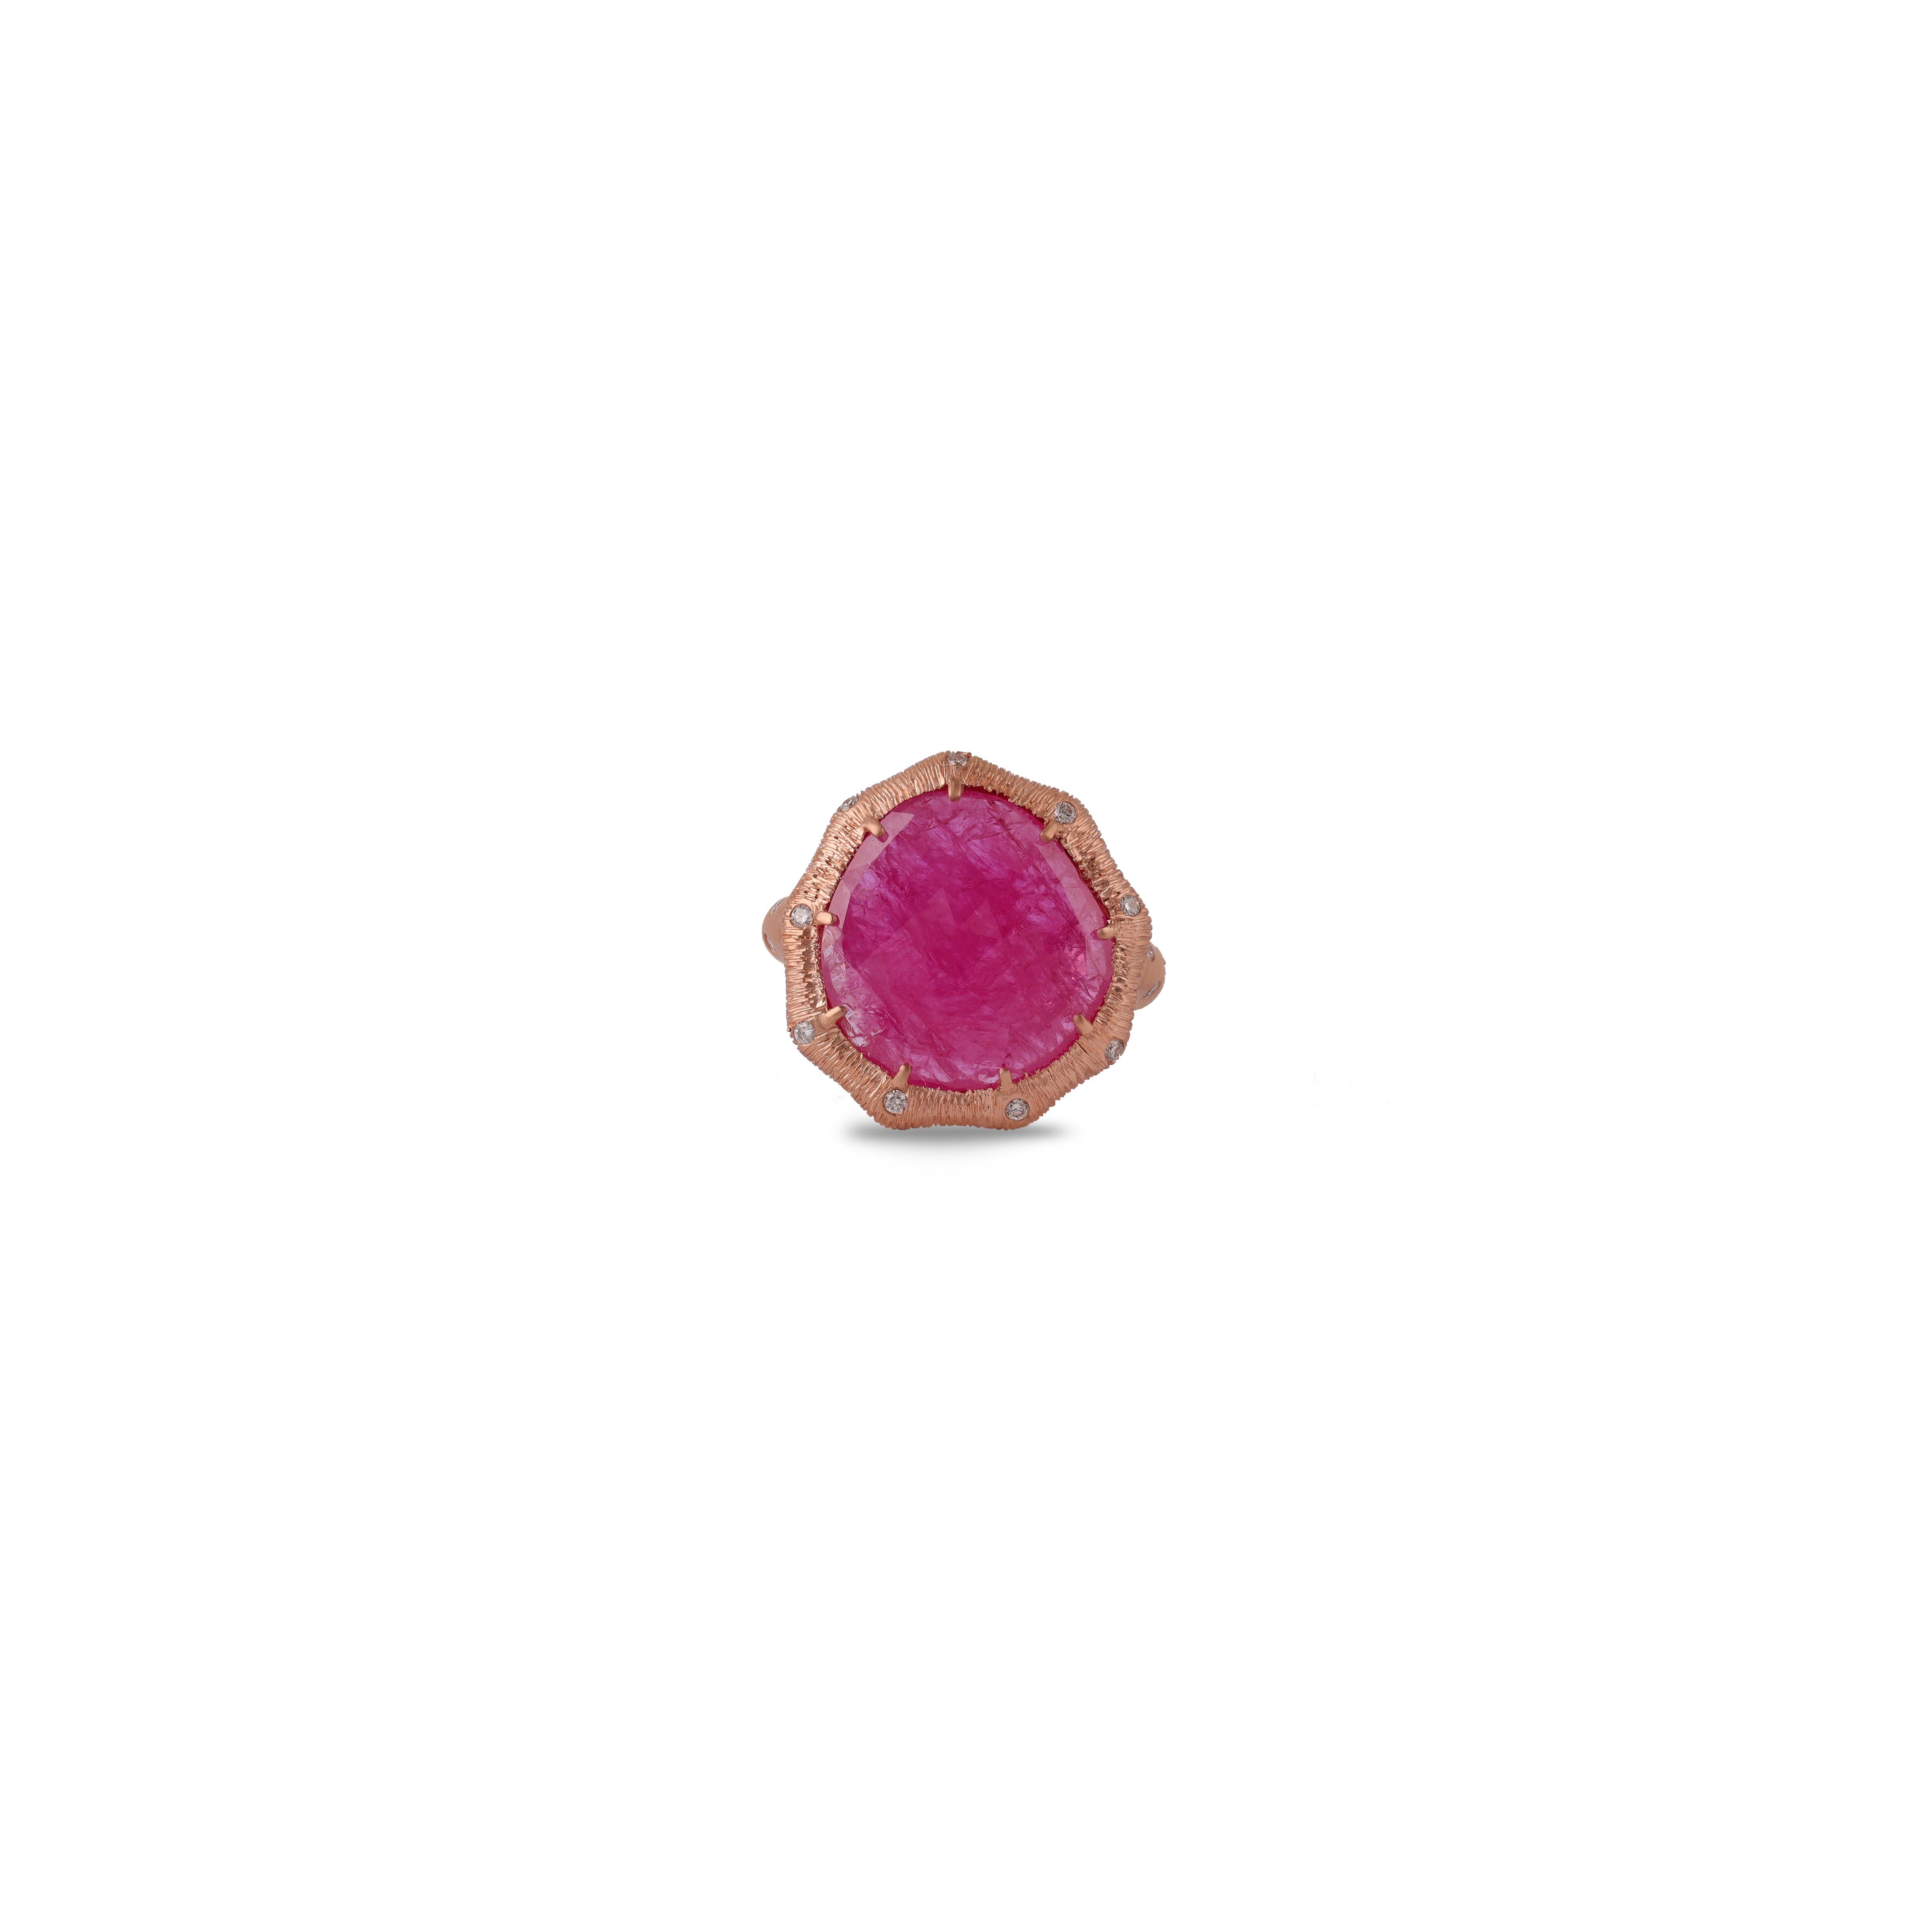 Magnificent ruby, Diamond . High brilliance, faceted             8.05 carats ruby mounted in high profile , accented with Diamond. Handcrafted masterpiece design set in high polished 18 karats Rose gold. 
Statement piece!

Ruby: 8.05 carats,